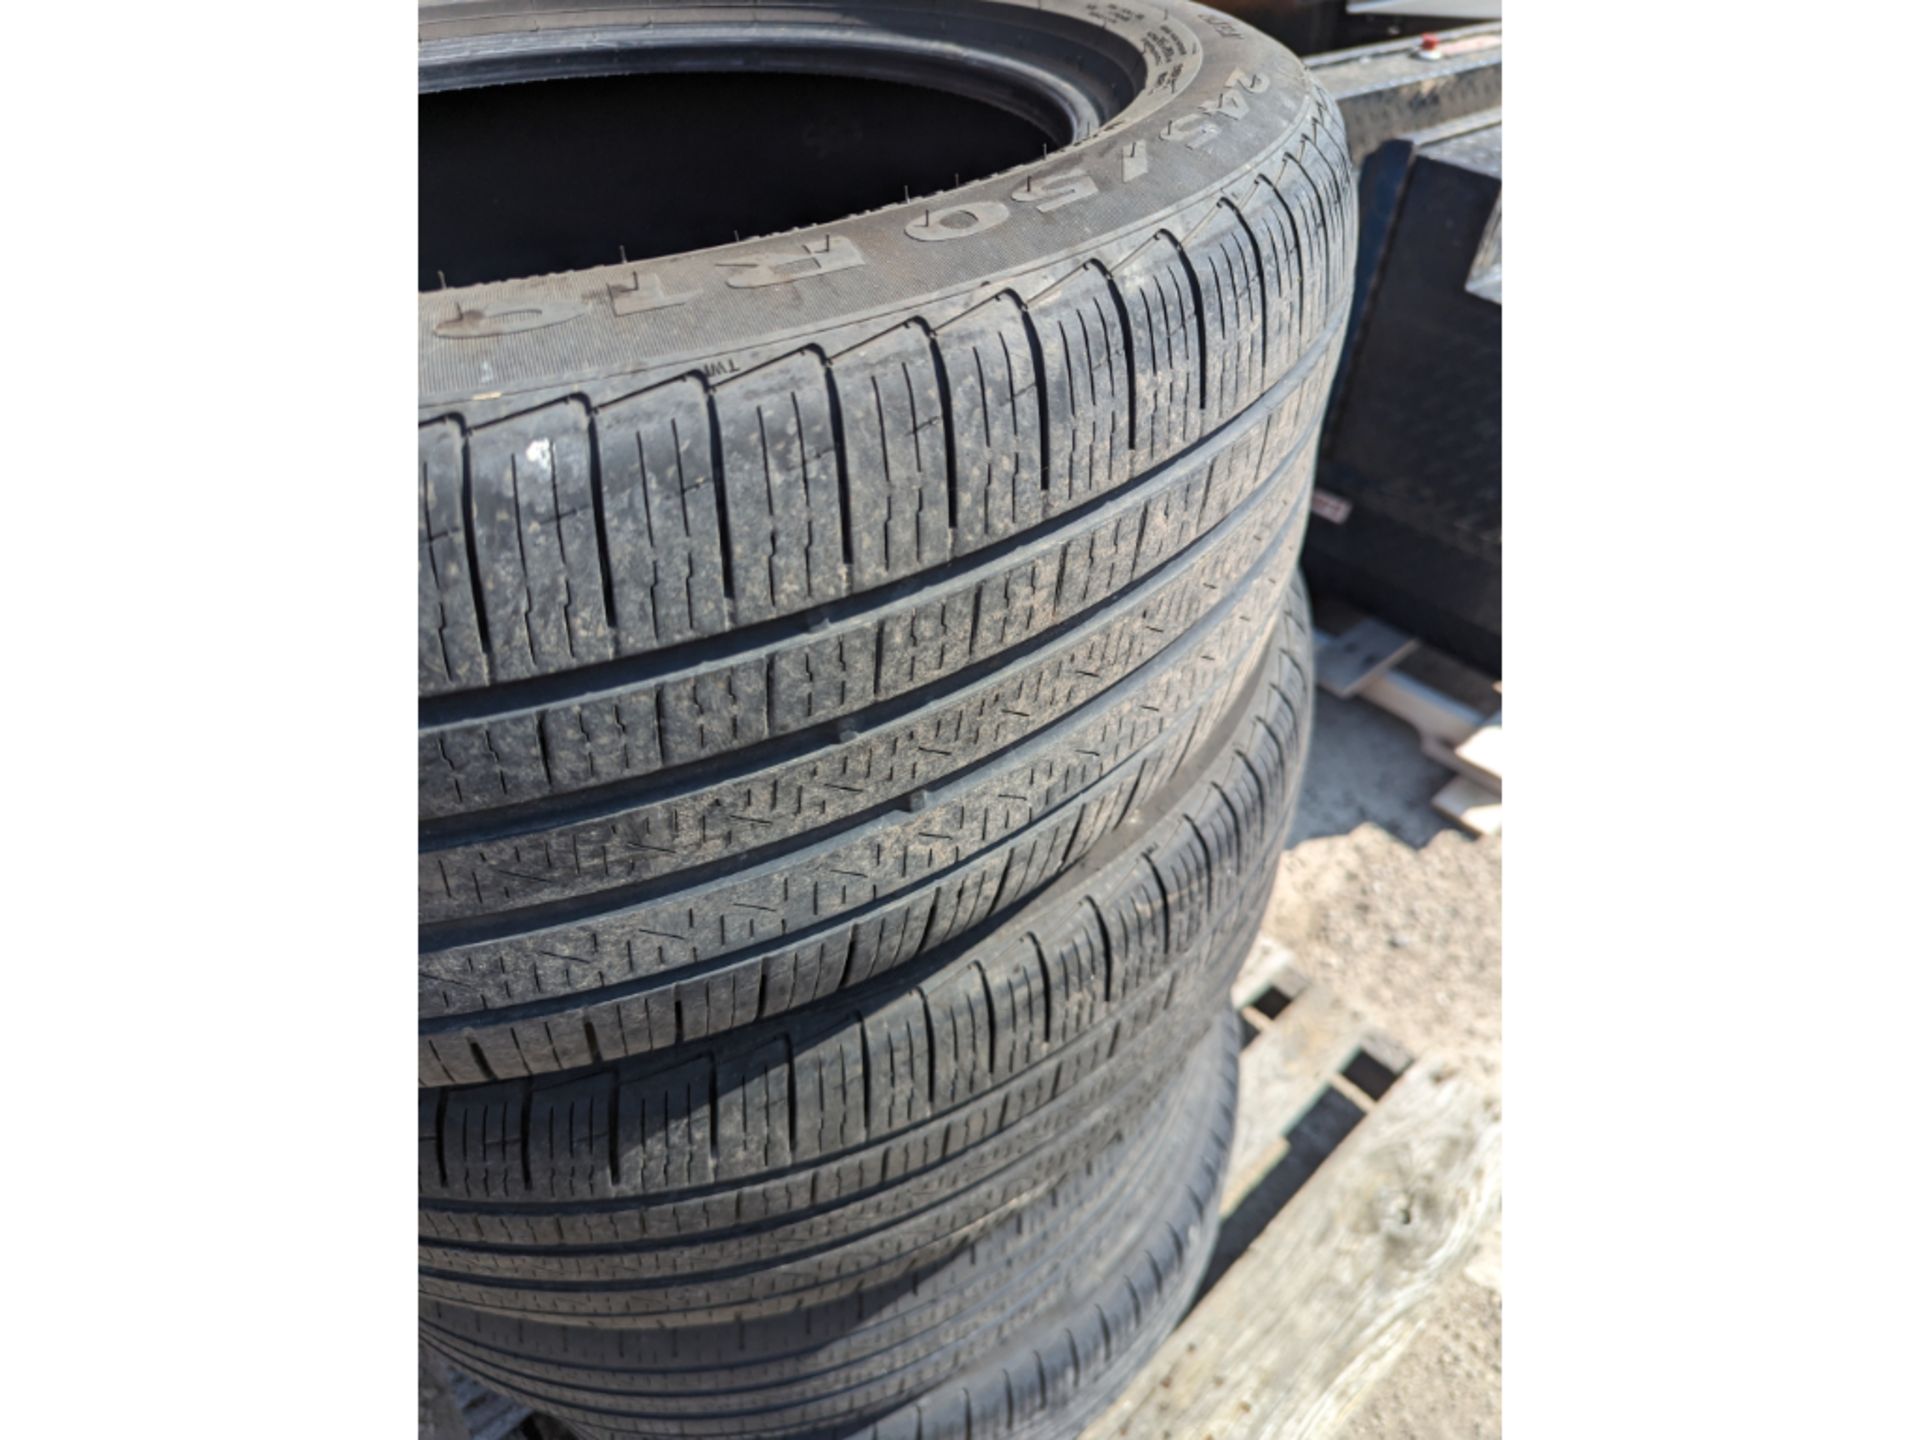 Cinturato P7 245/50R19 Tires, Came off 2021 BMW X3 w/ 35k Miles, Run Flats - Image 2 of 5